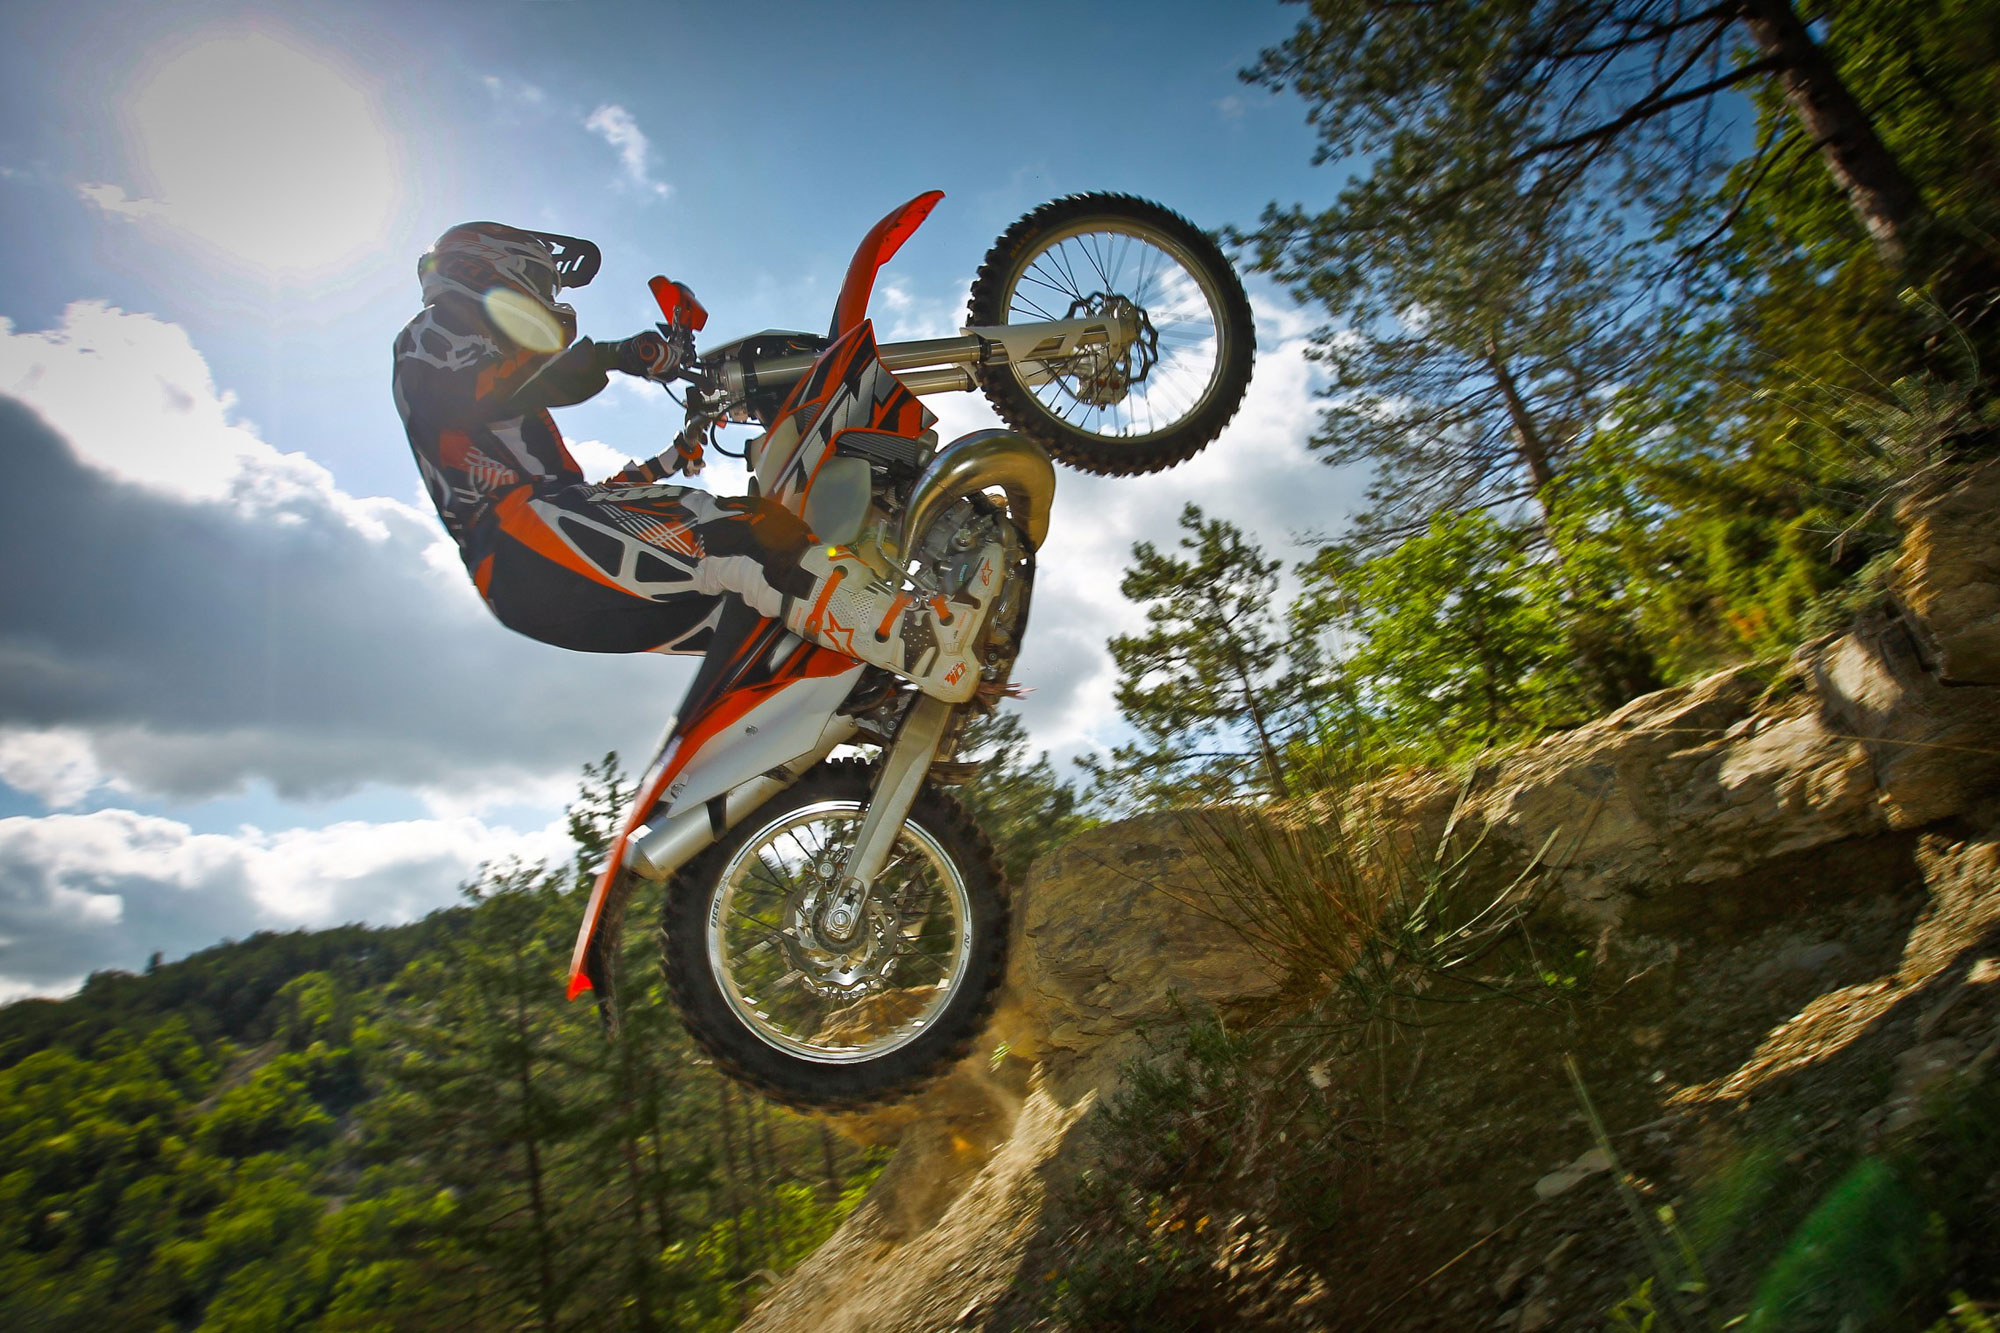 Download hd wallpapers of 87261-2013, Ktm, 250exc. 